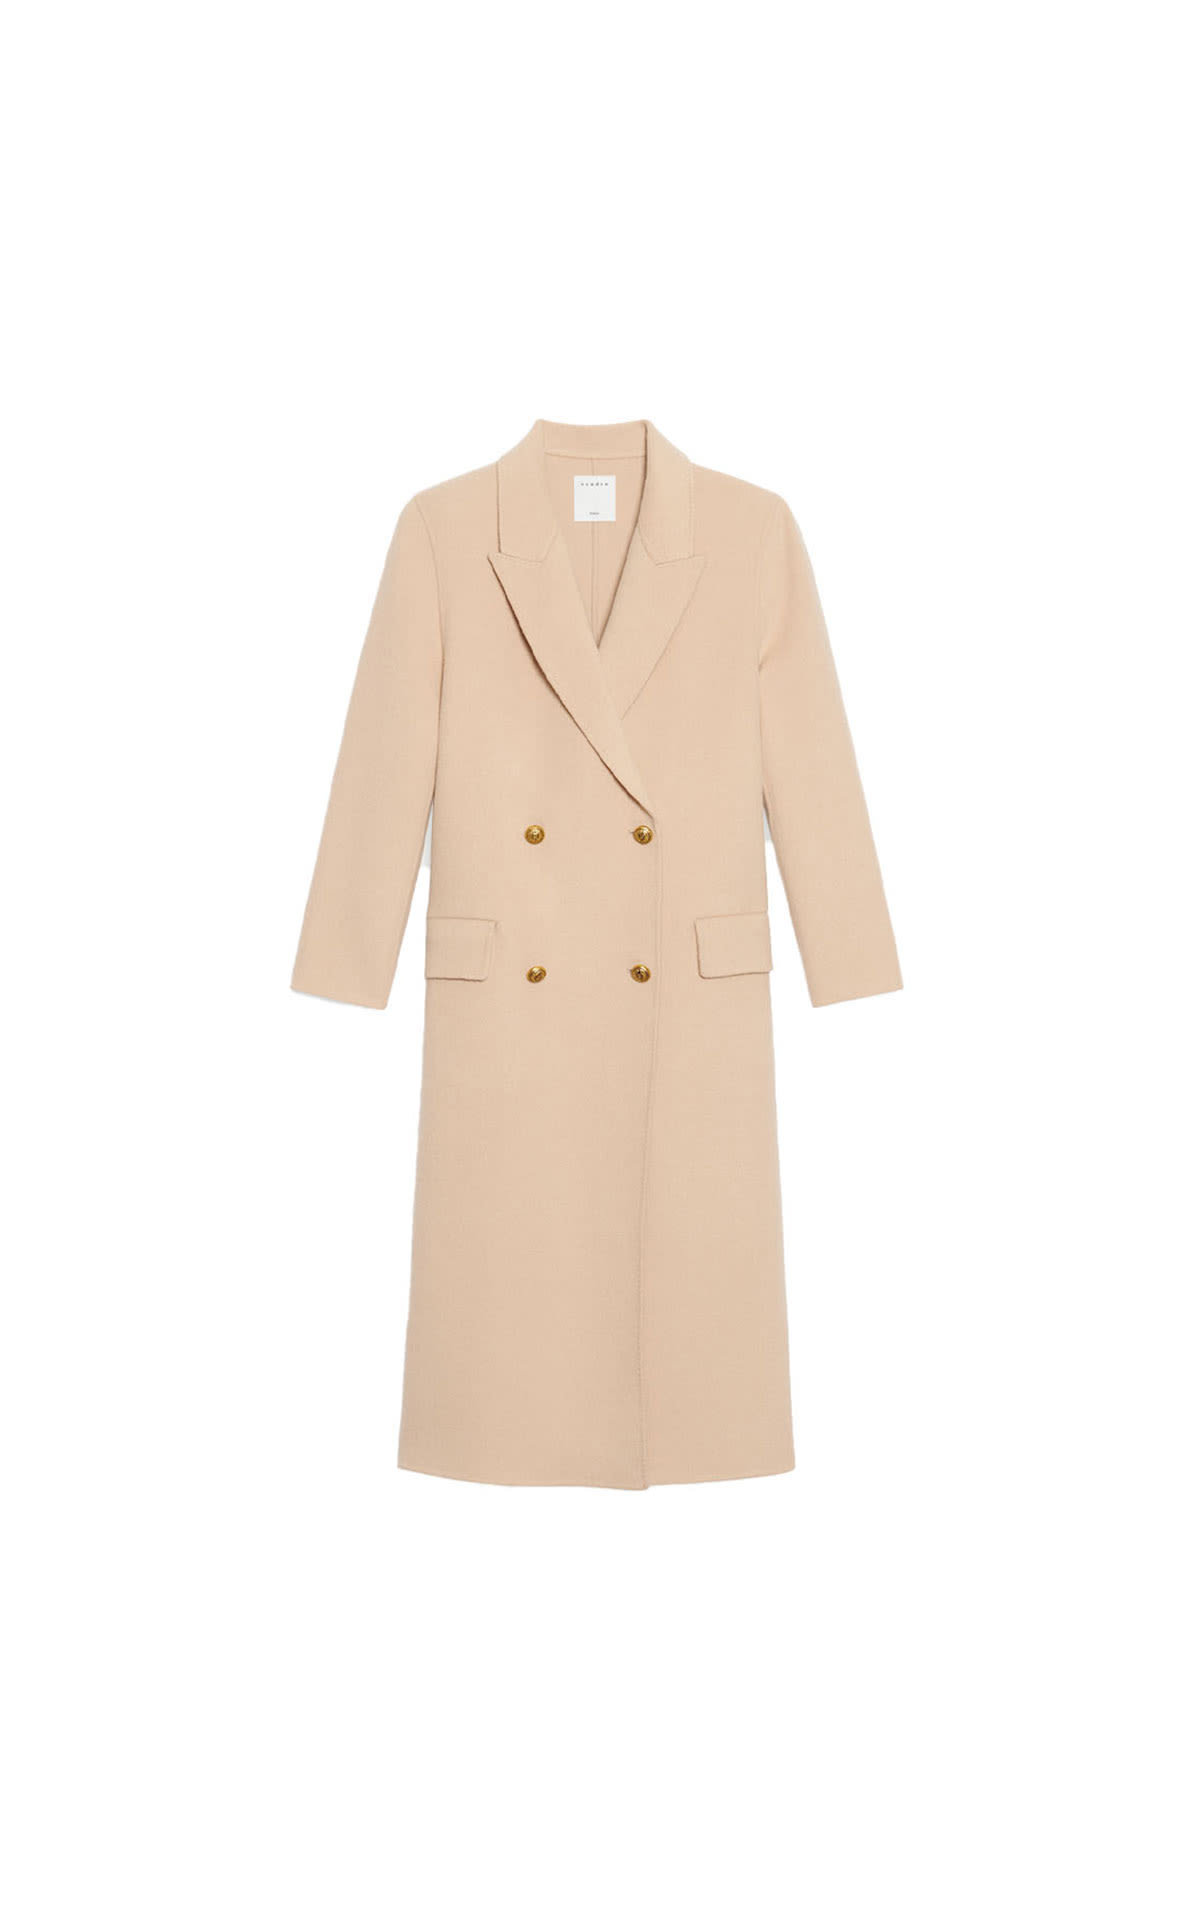 Sandro Mystere coat from Bicester Village